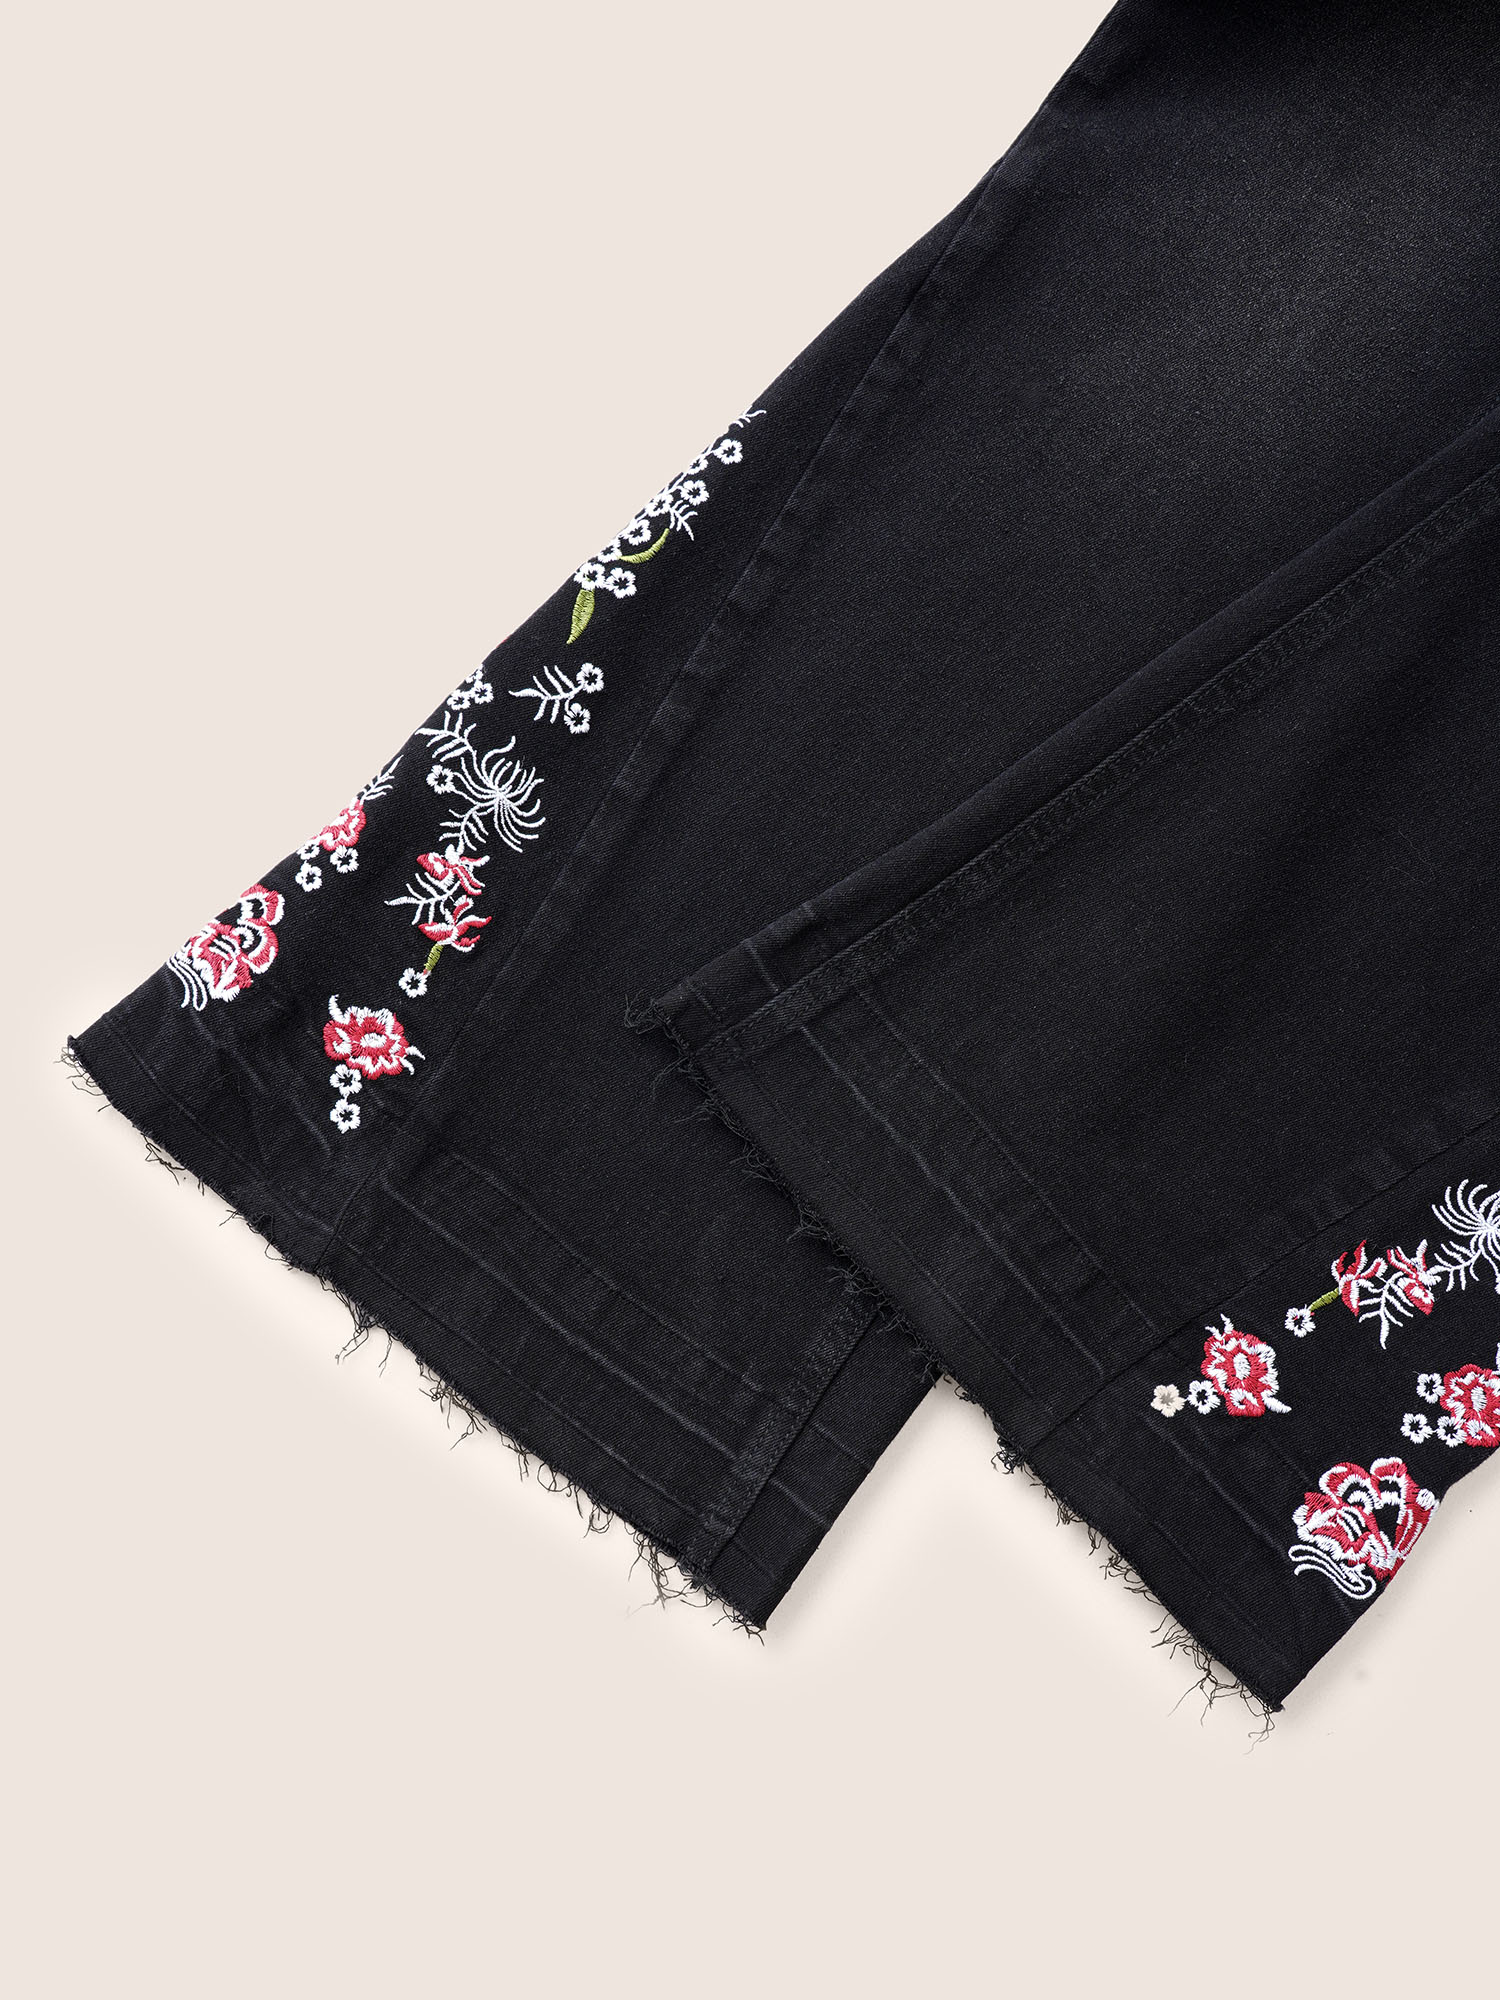 

Plus Size Floral Embroidered Raw Hem Bootcut Jeans Women Black Elegant Plants Non High stretch Slanted pocket Jeans BloomChic